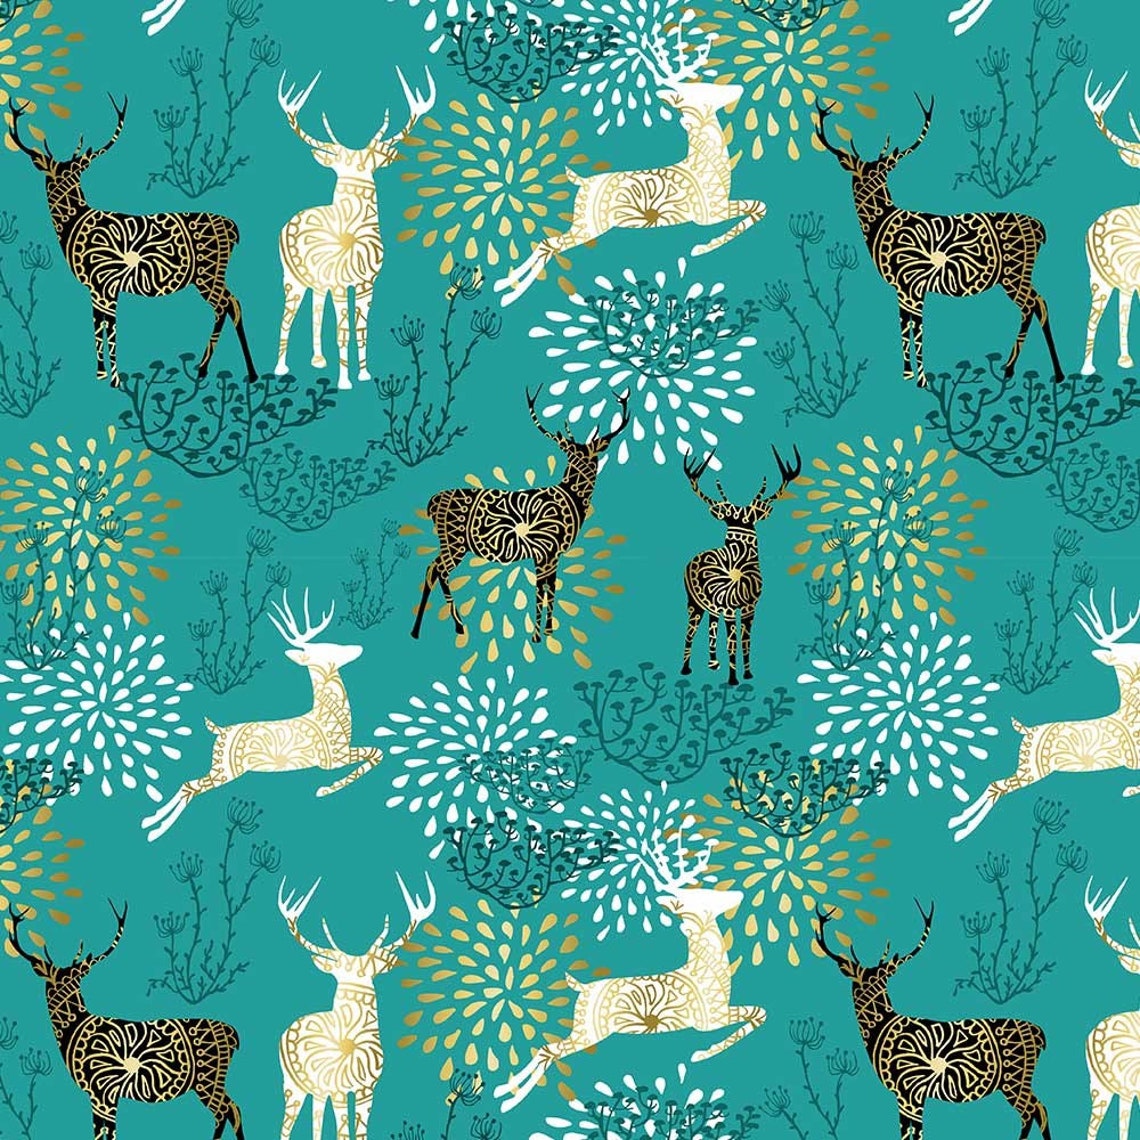 Deer fabric by the yard